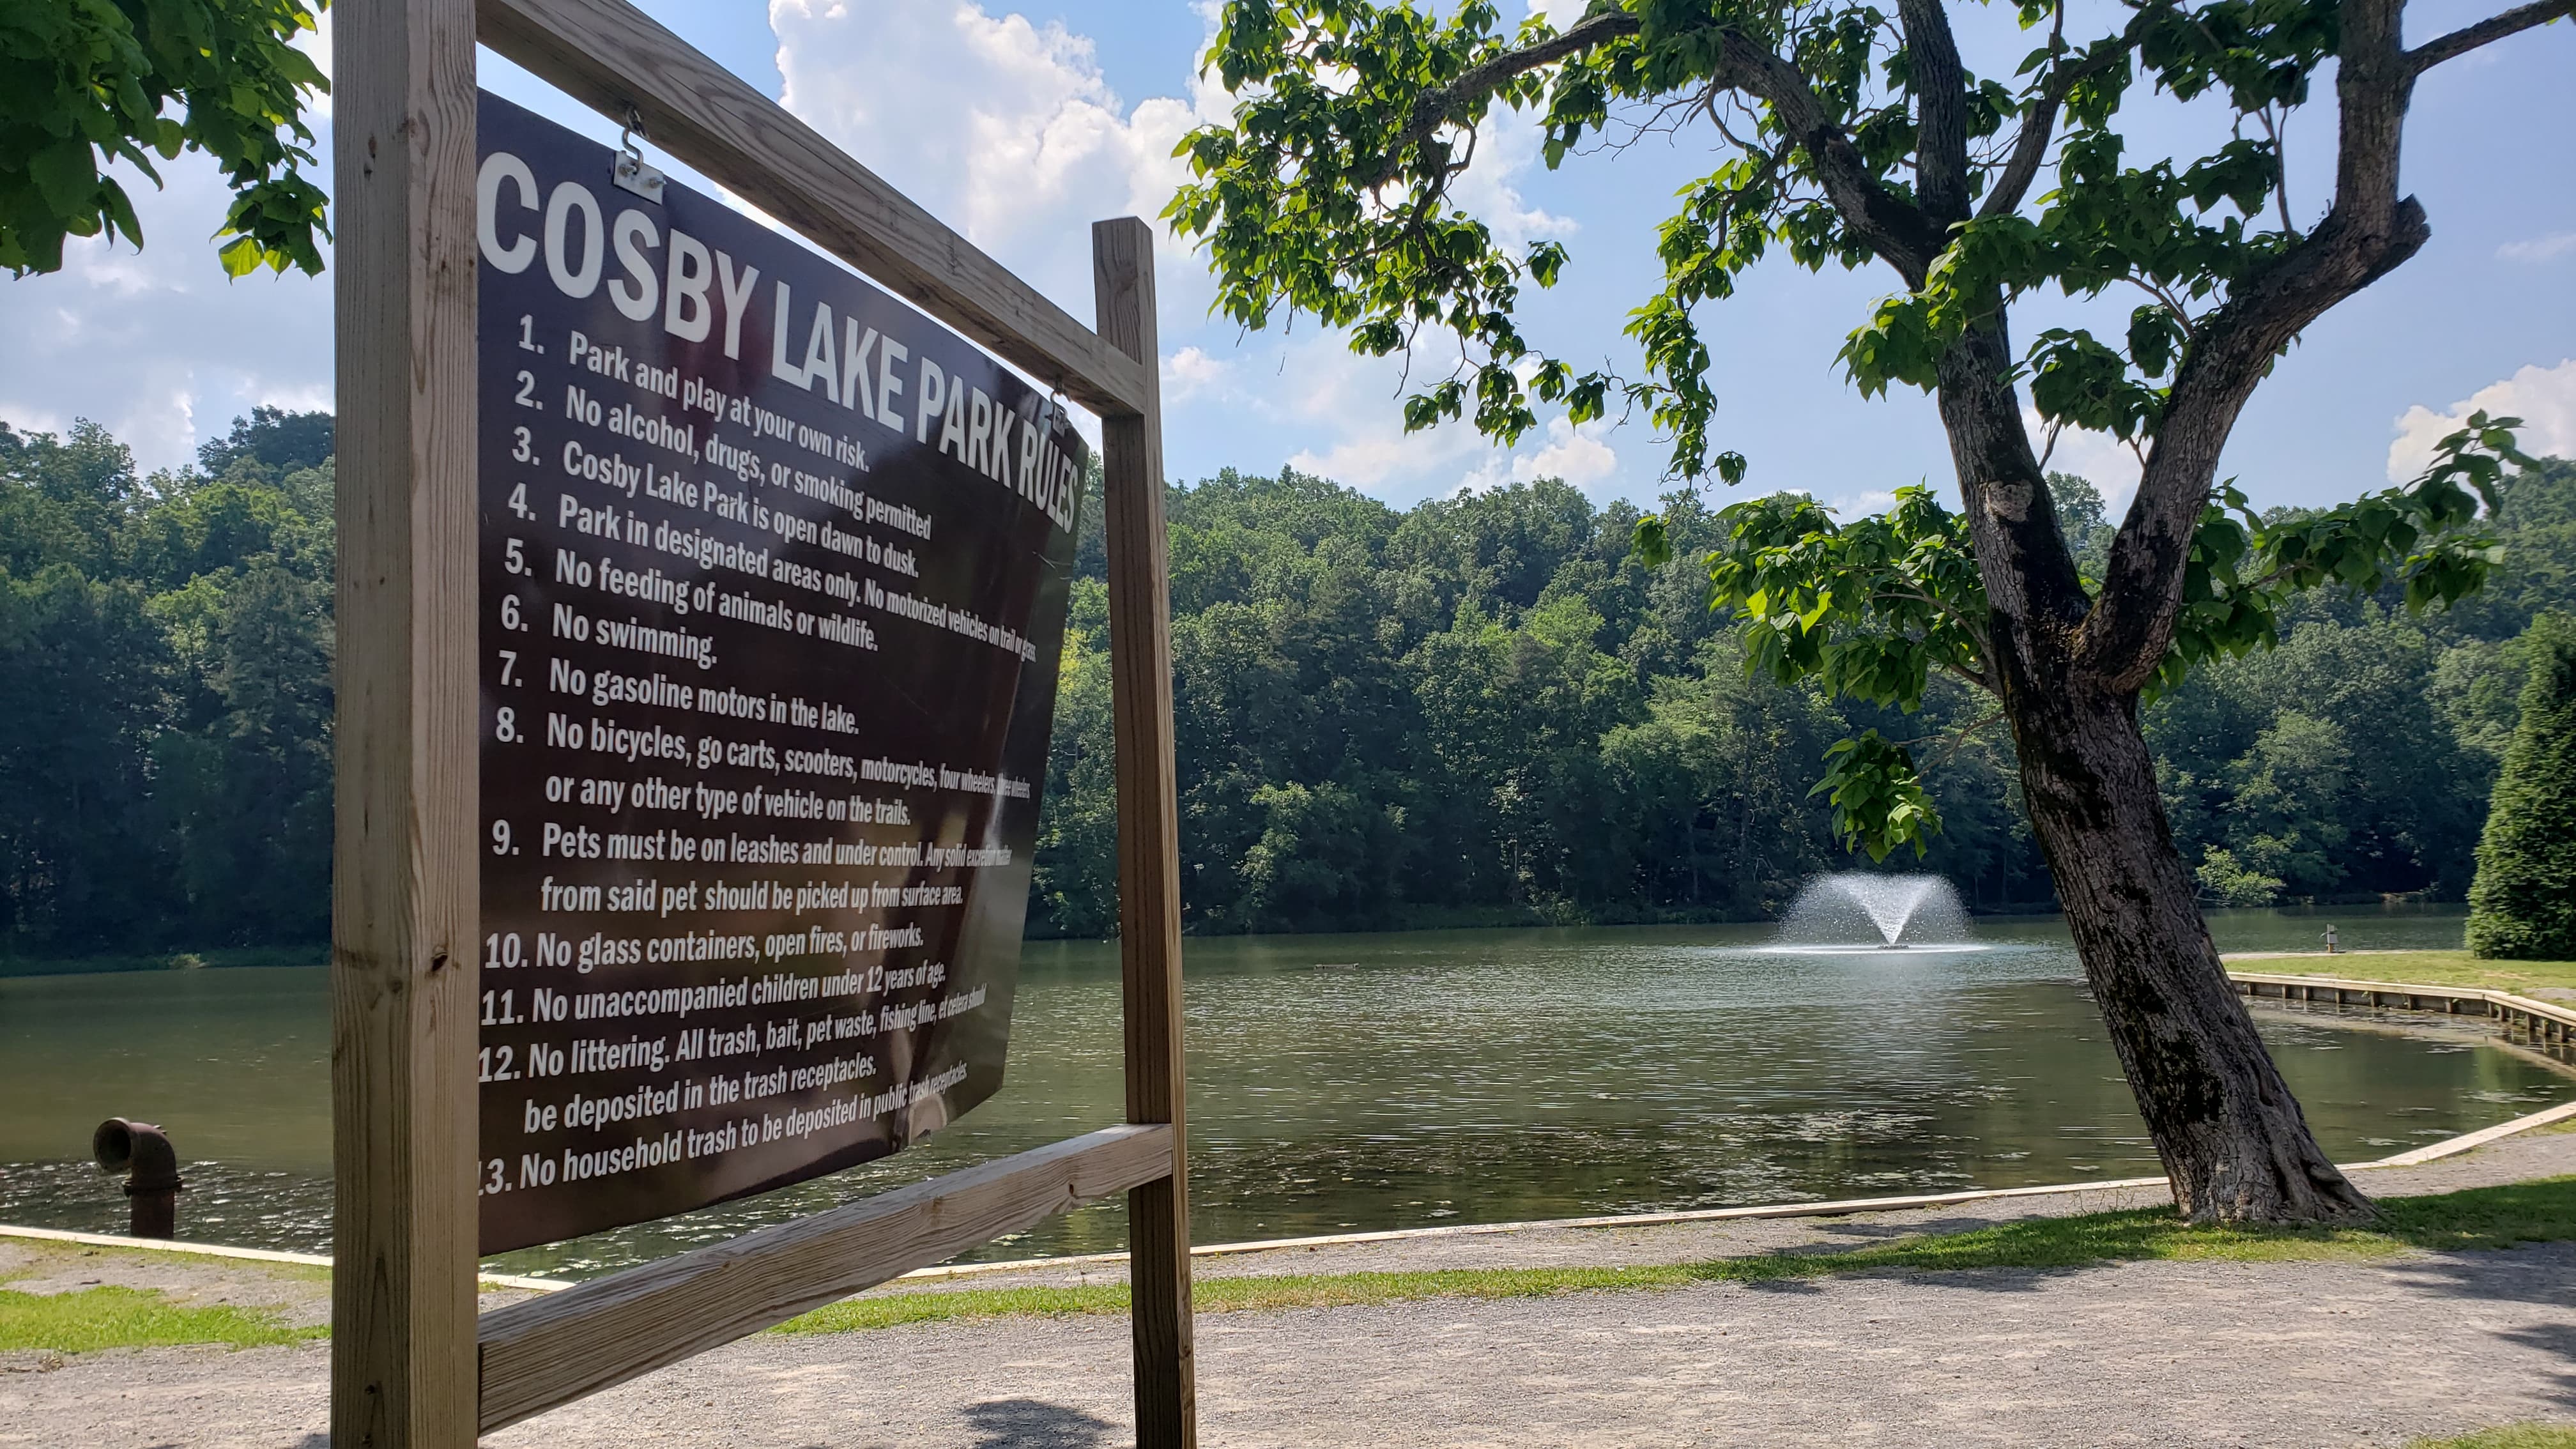 Clay Council sets new rules for fishing at Cosby Lake